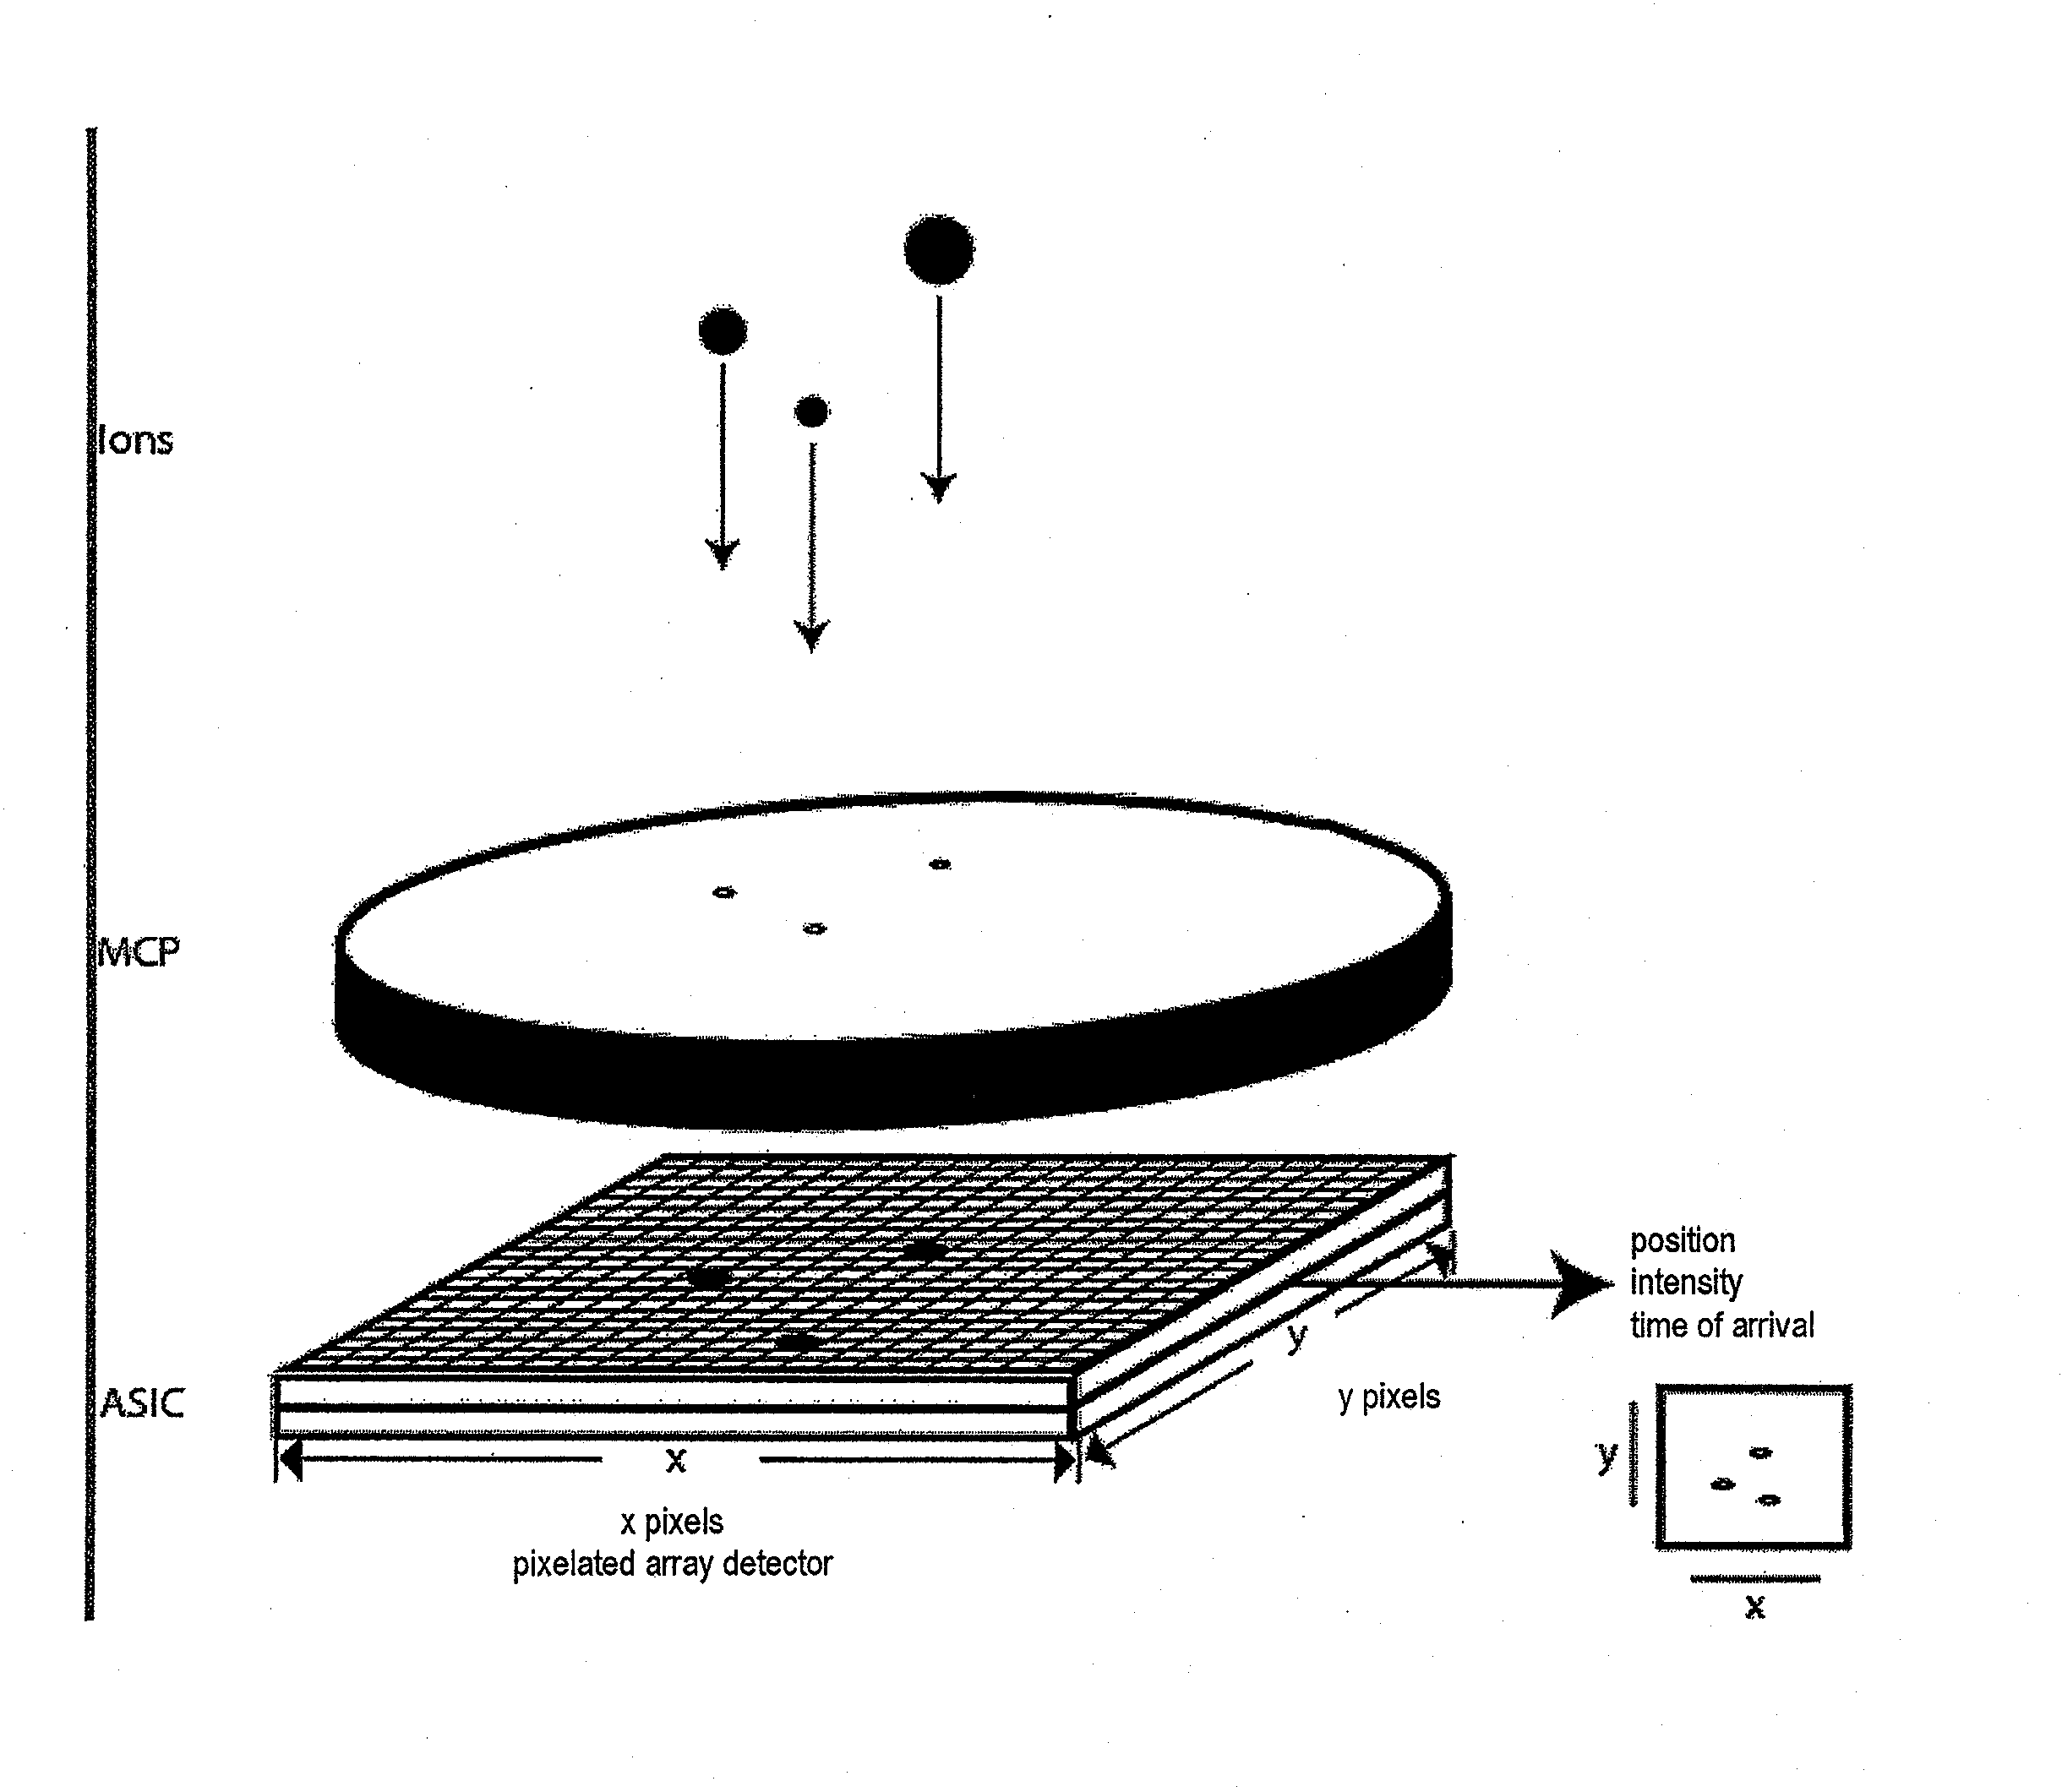 Imaging mass spectrometry principle and its application in a device